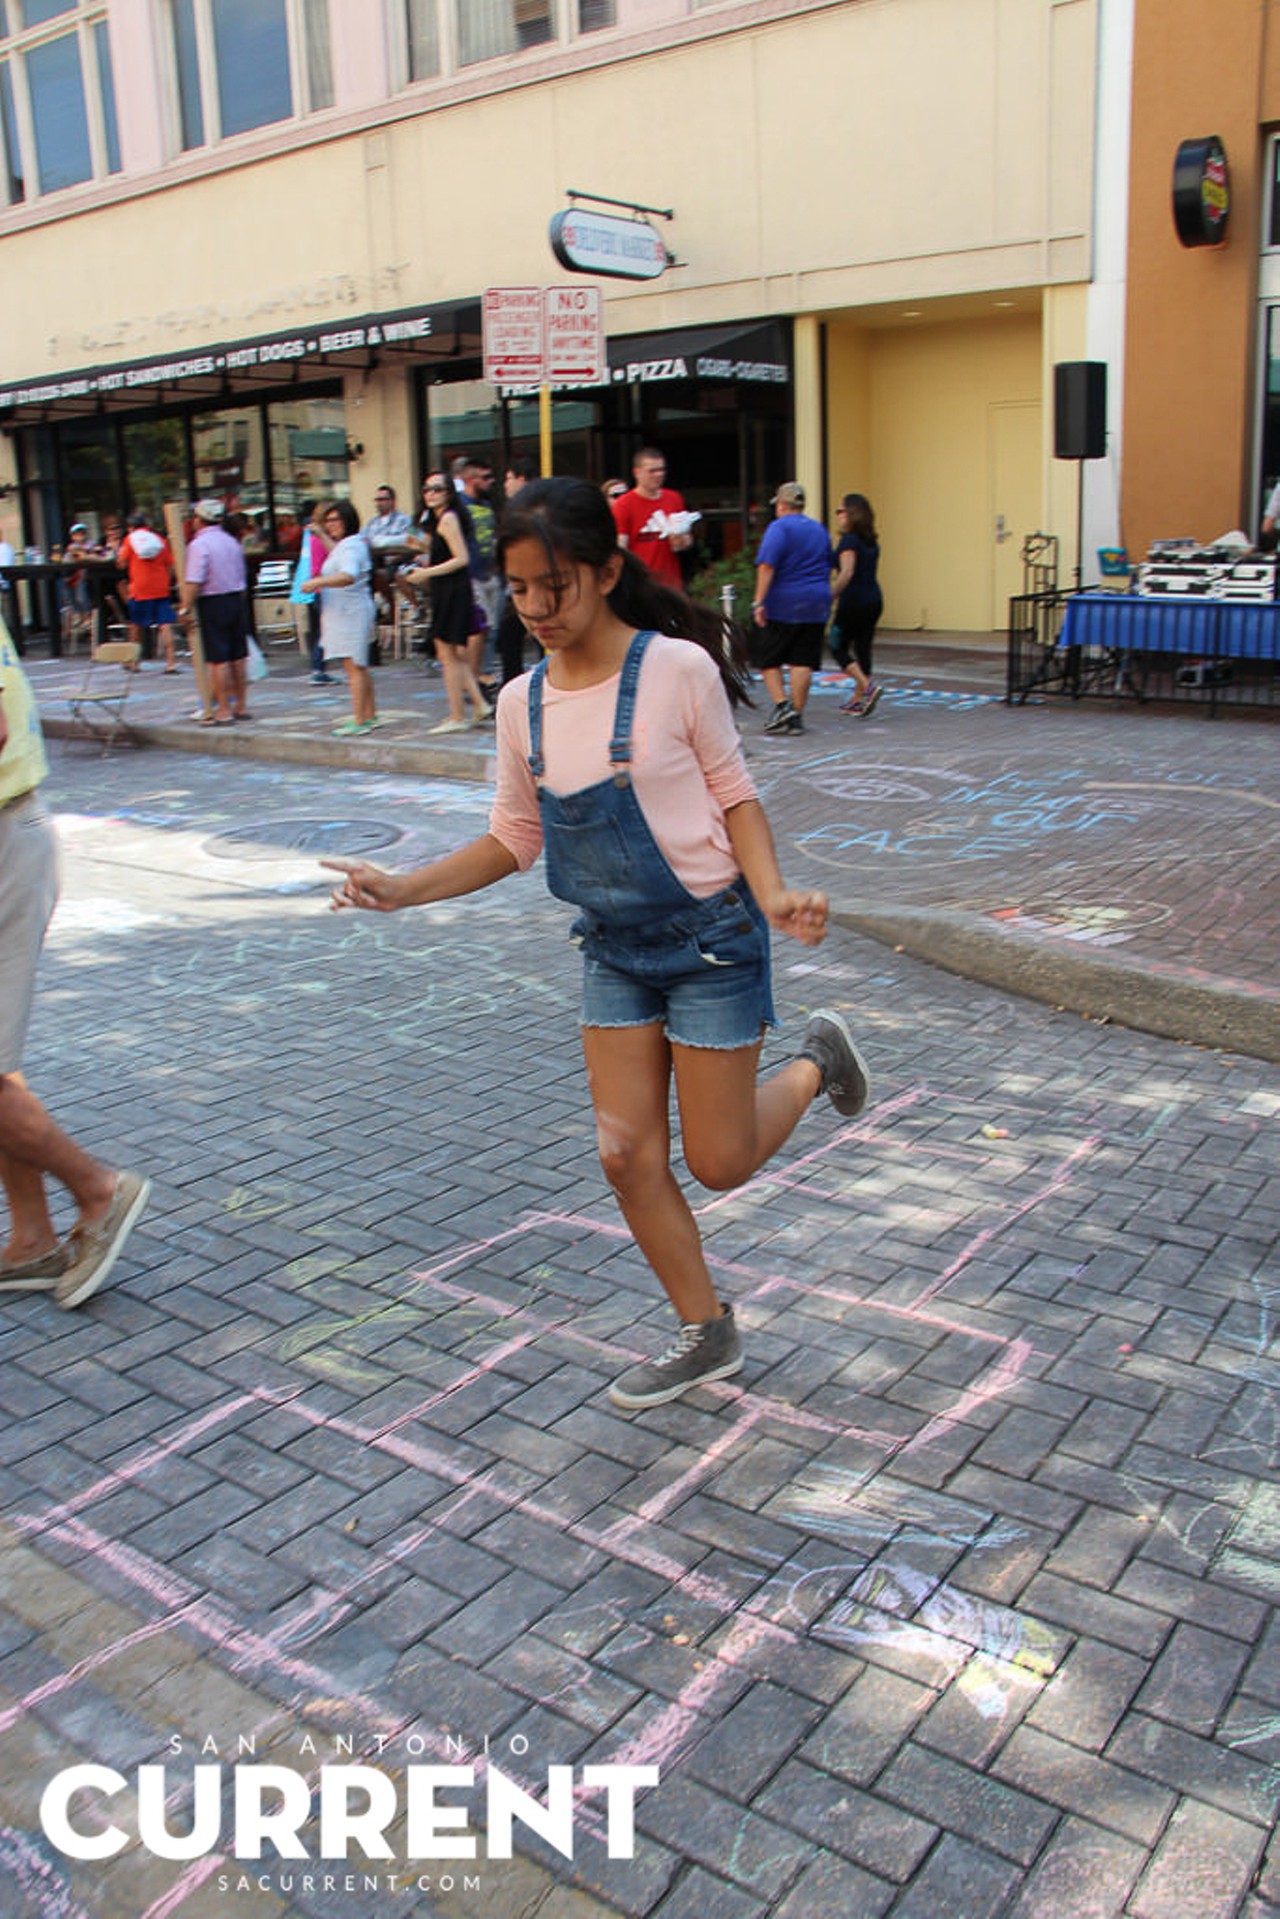 39 More Photos of Artpace Chalk It Up